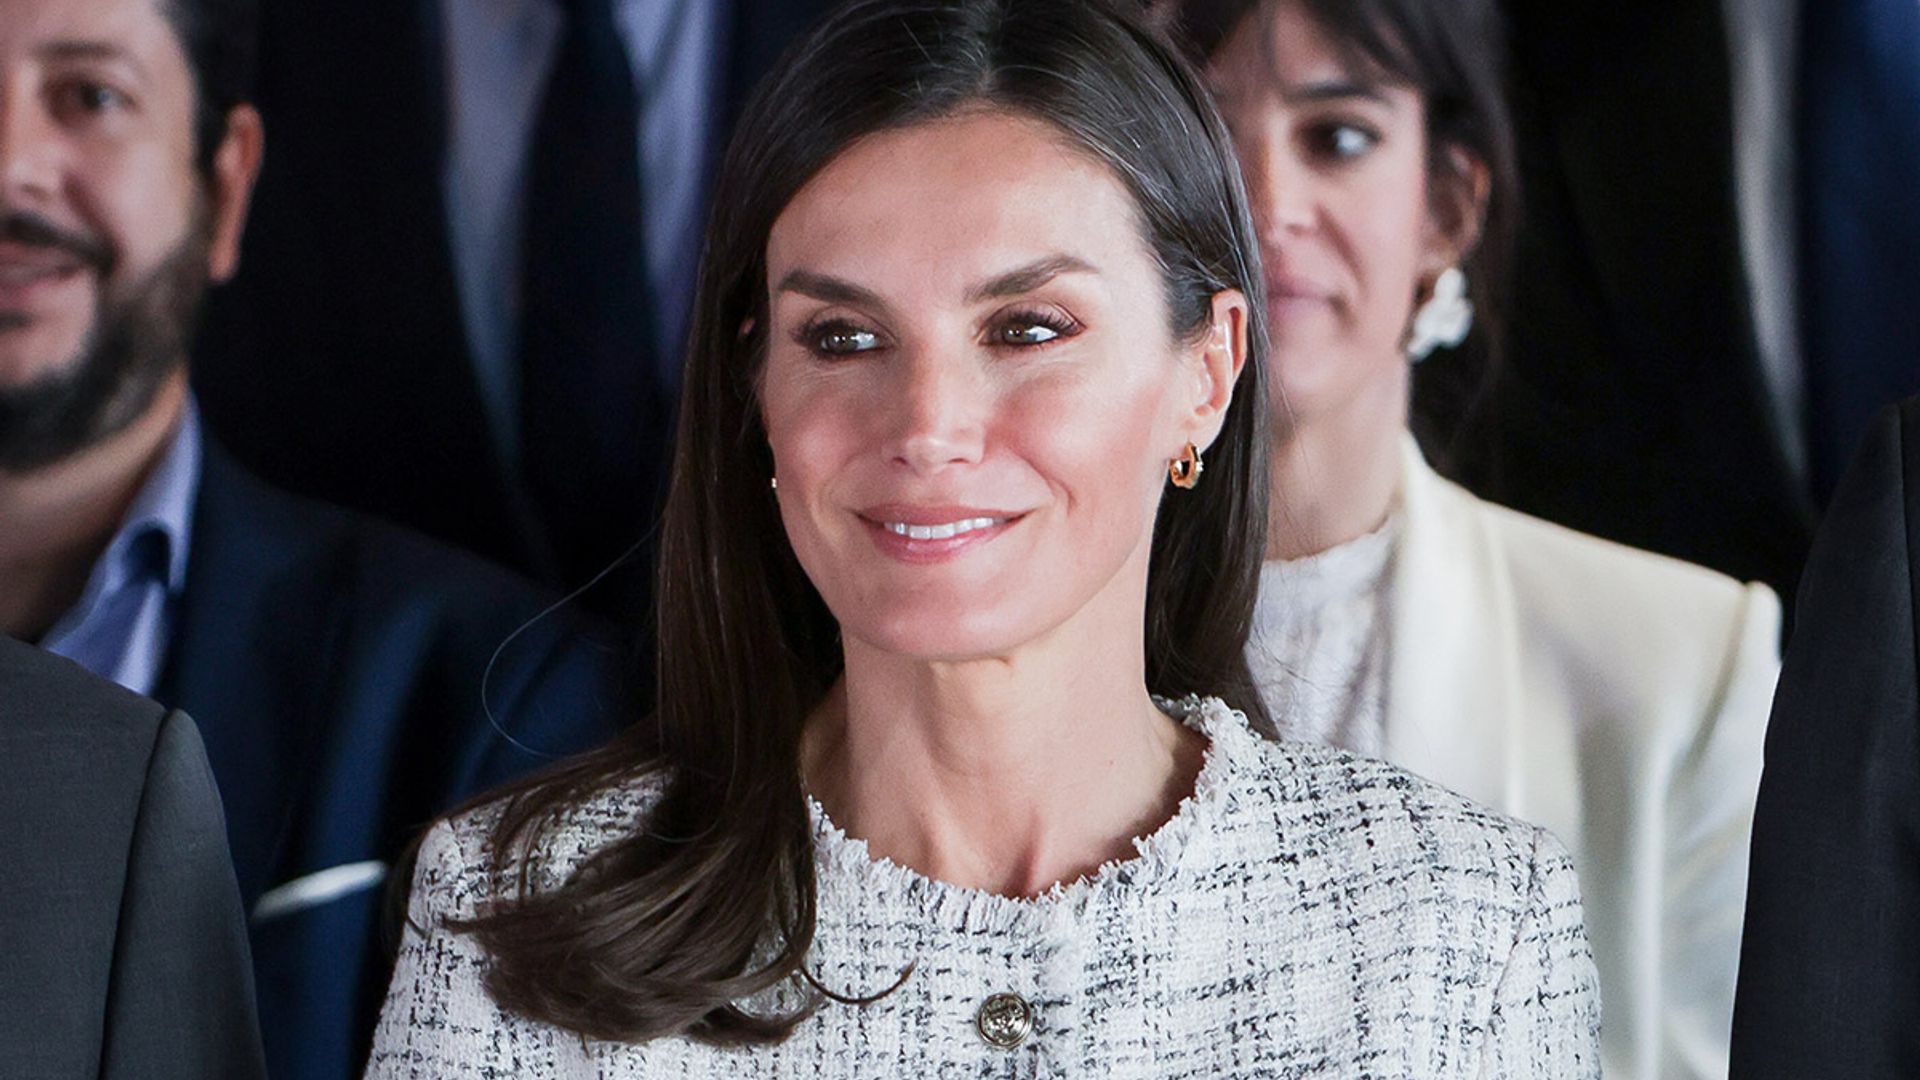 Queen Letizia looks chic in tweed jacket and smoky eye make-up today